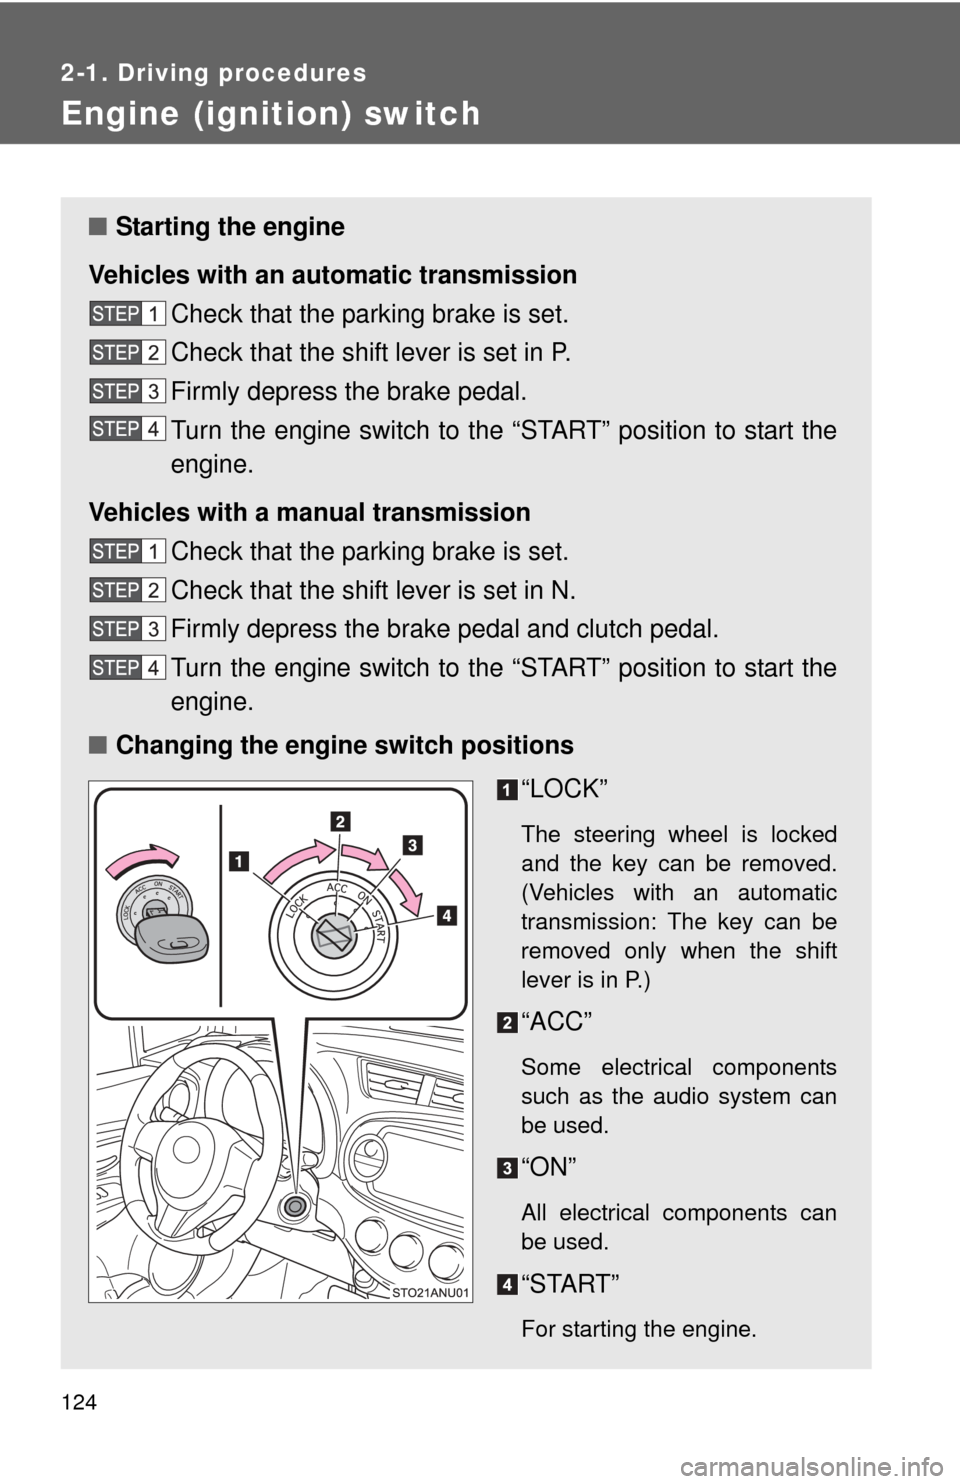 TOYOTA YARIS 2014 3.G User Guide 124
2-1. Driving procedures
Engine (ignition) switch 
■Starting the engine
Vehicles with an au tomatic transmission
Check that the parking brake is set.
Check that the shift lever is set in P.
Firml